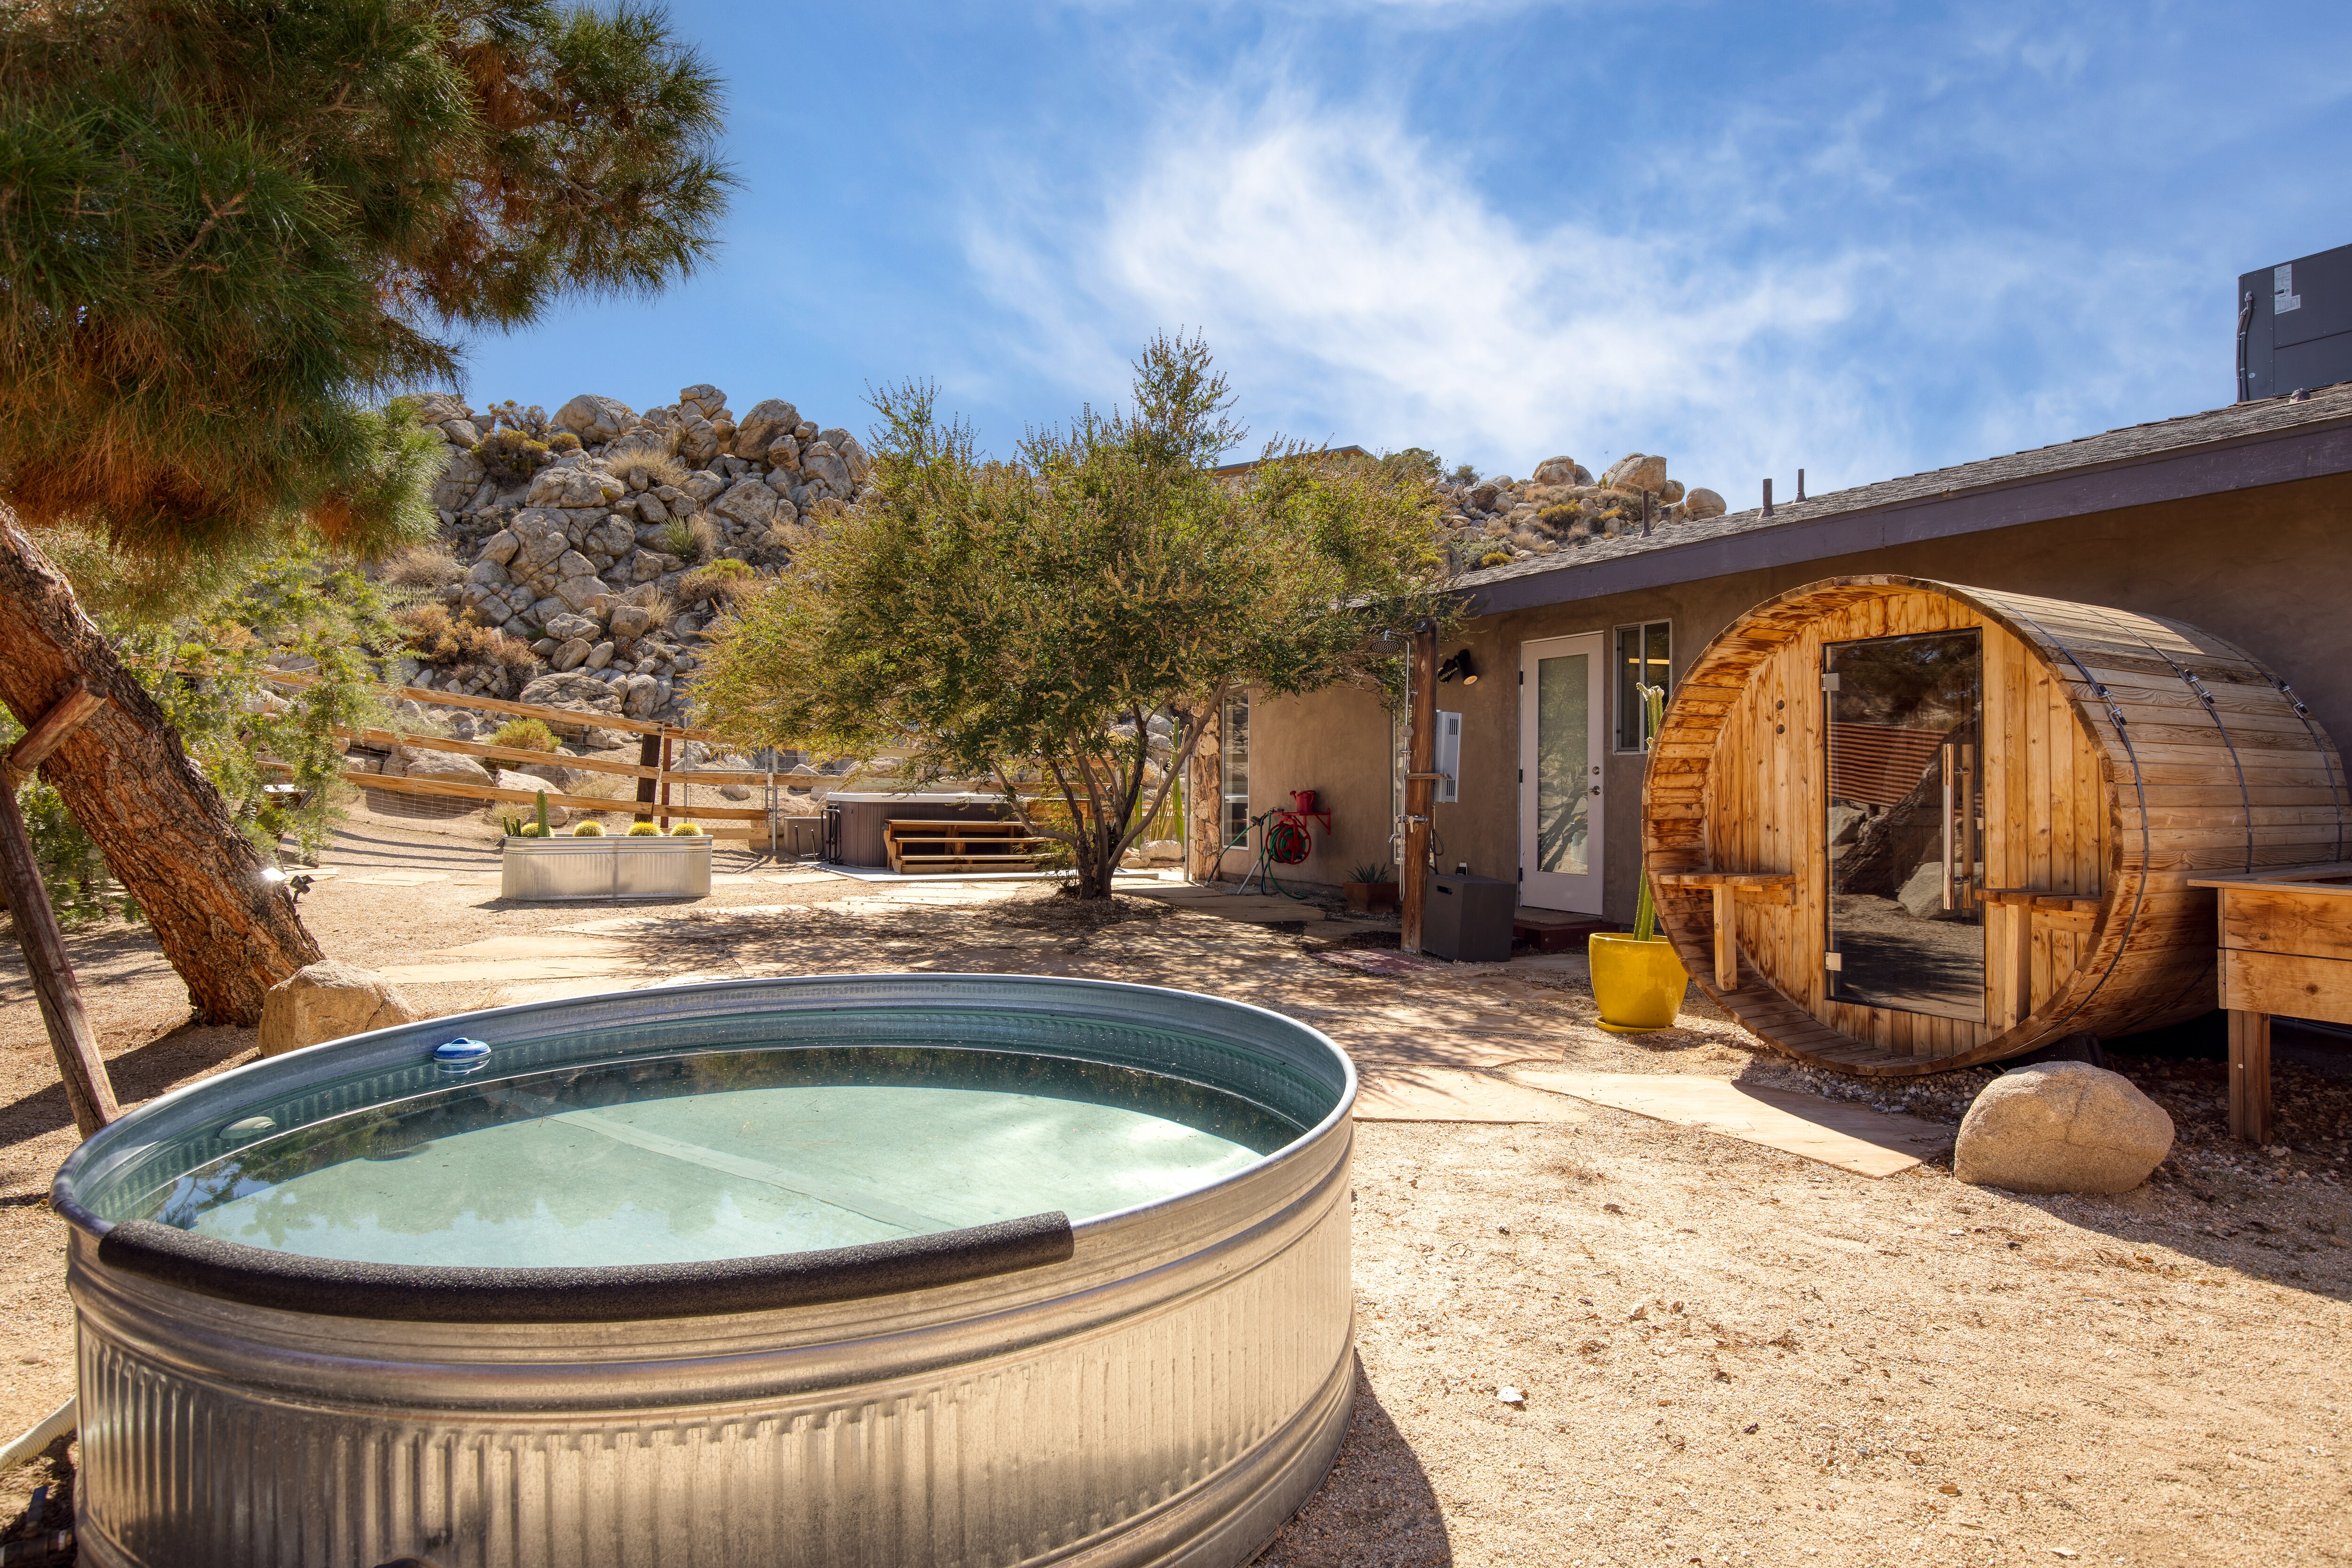 Stunning Joshua Tree escape with tons of amenities, including a stock tank pool and sauna!